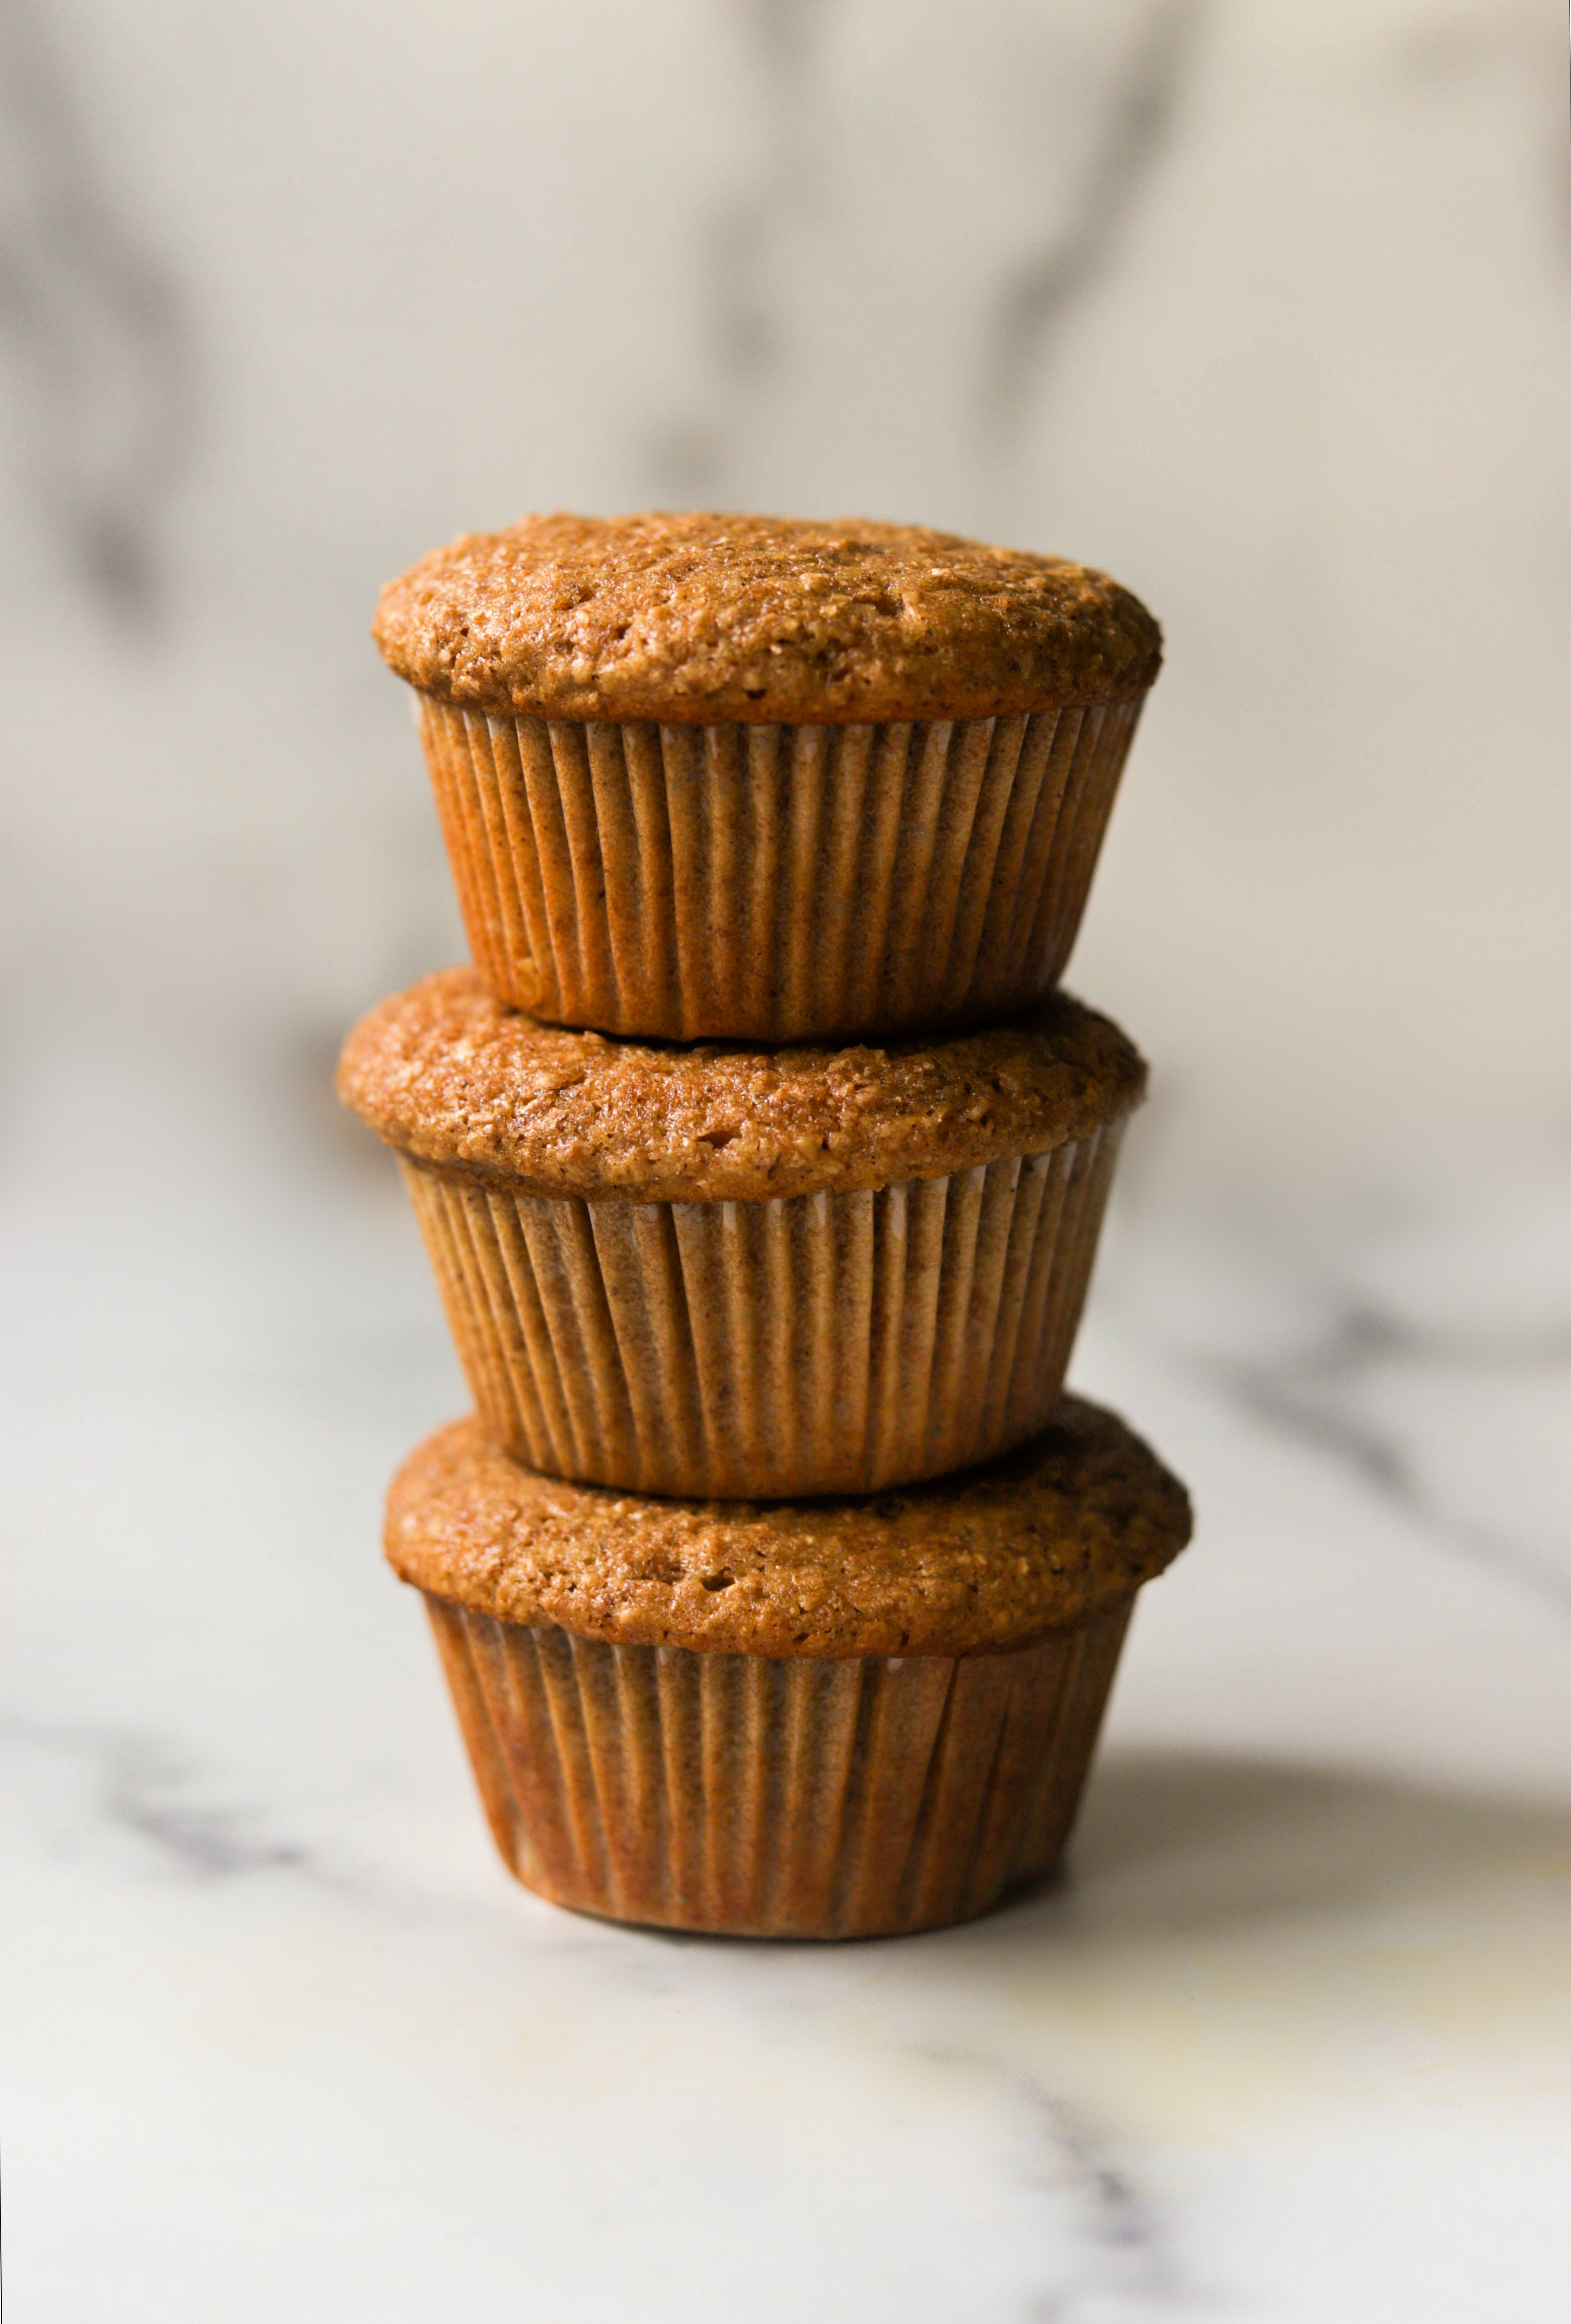 A front shot of 3 bran muffins stacked on top of each other.